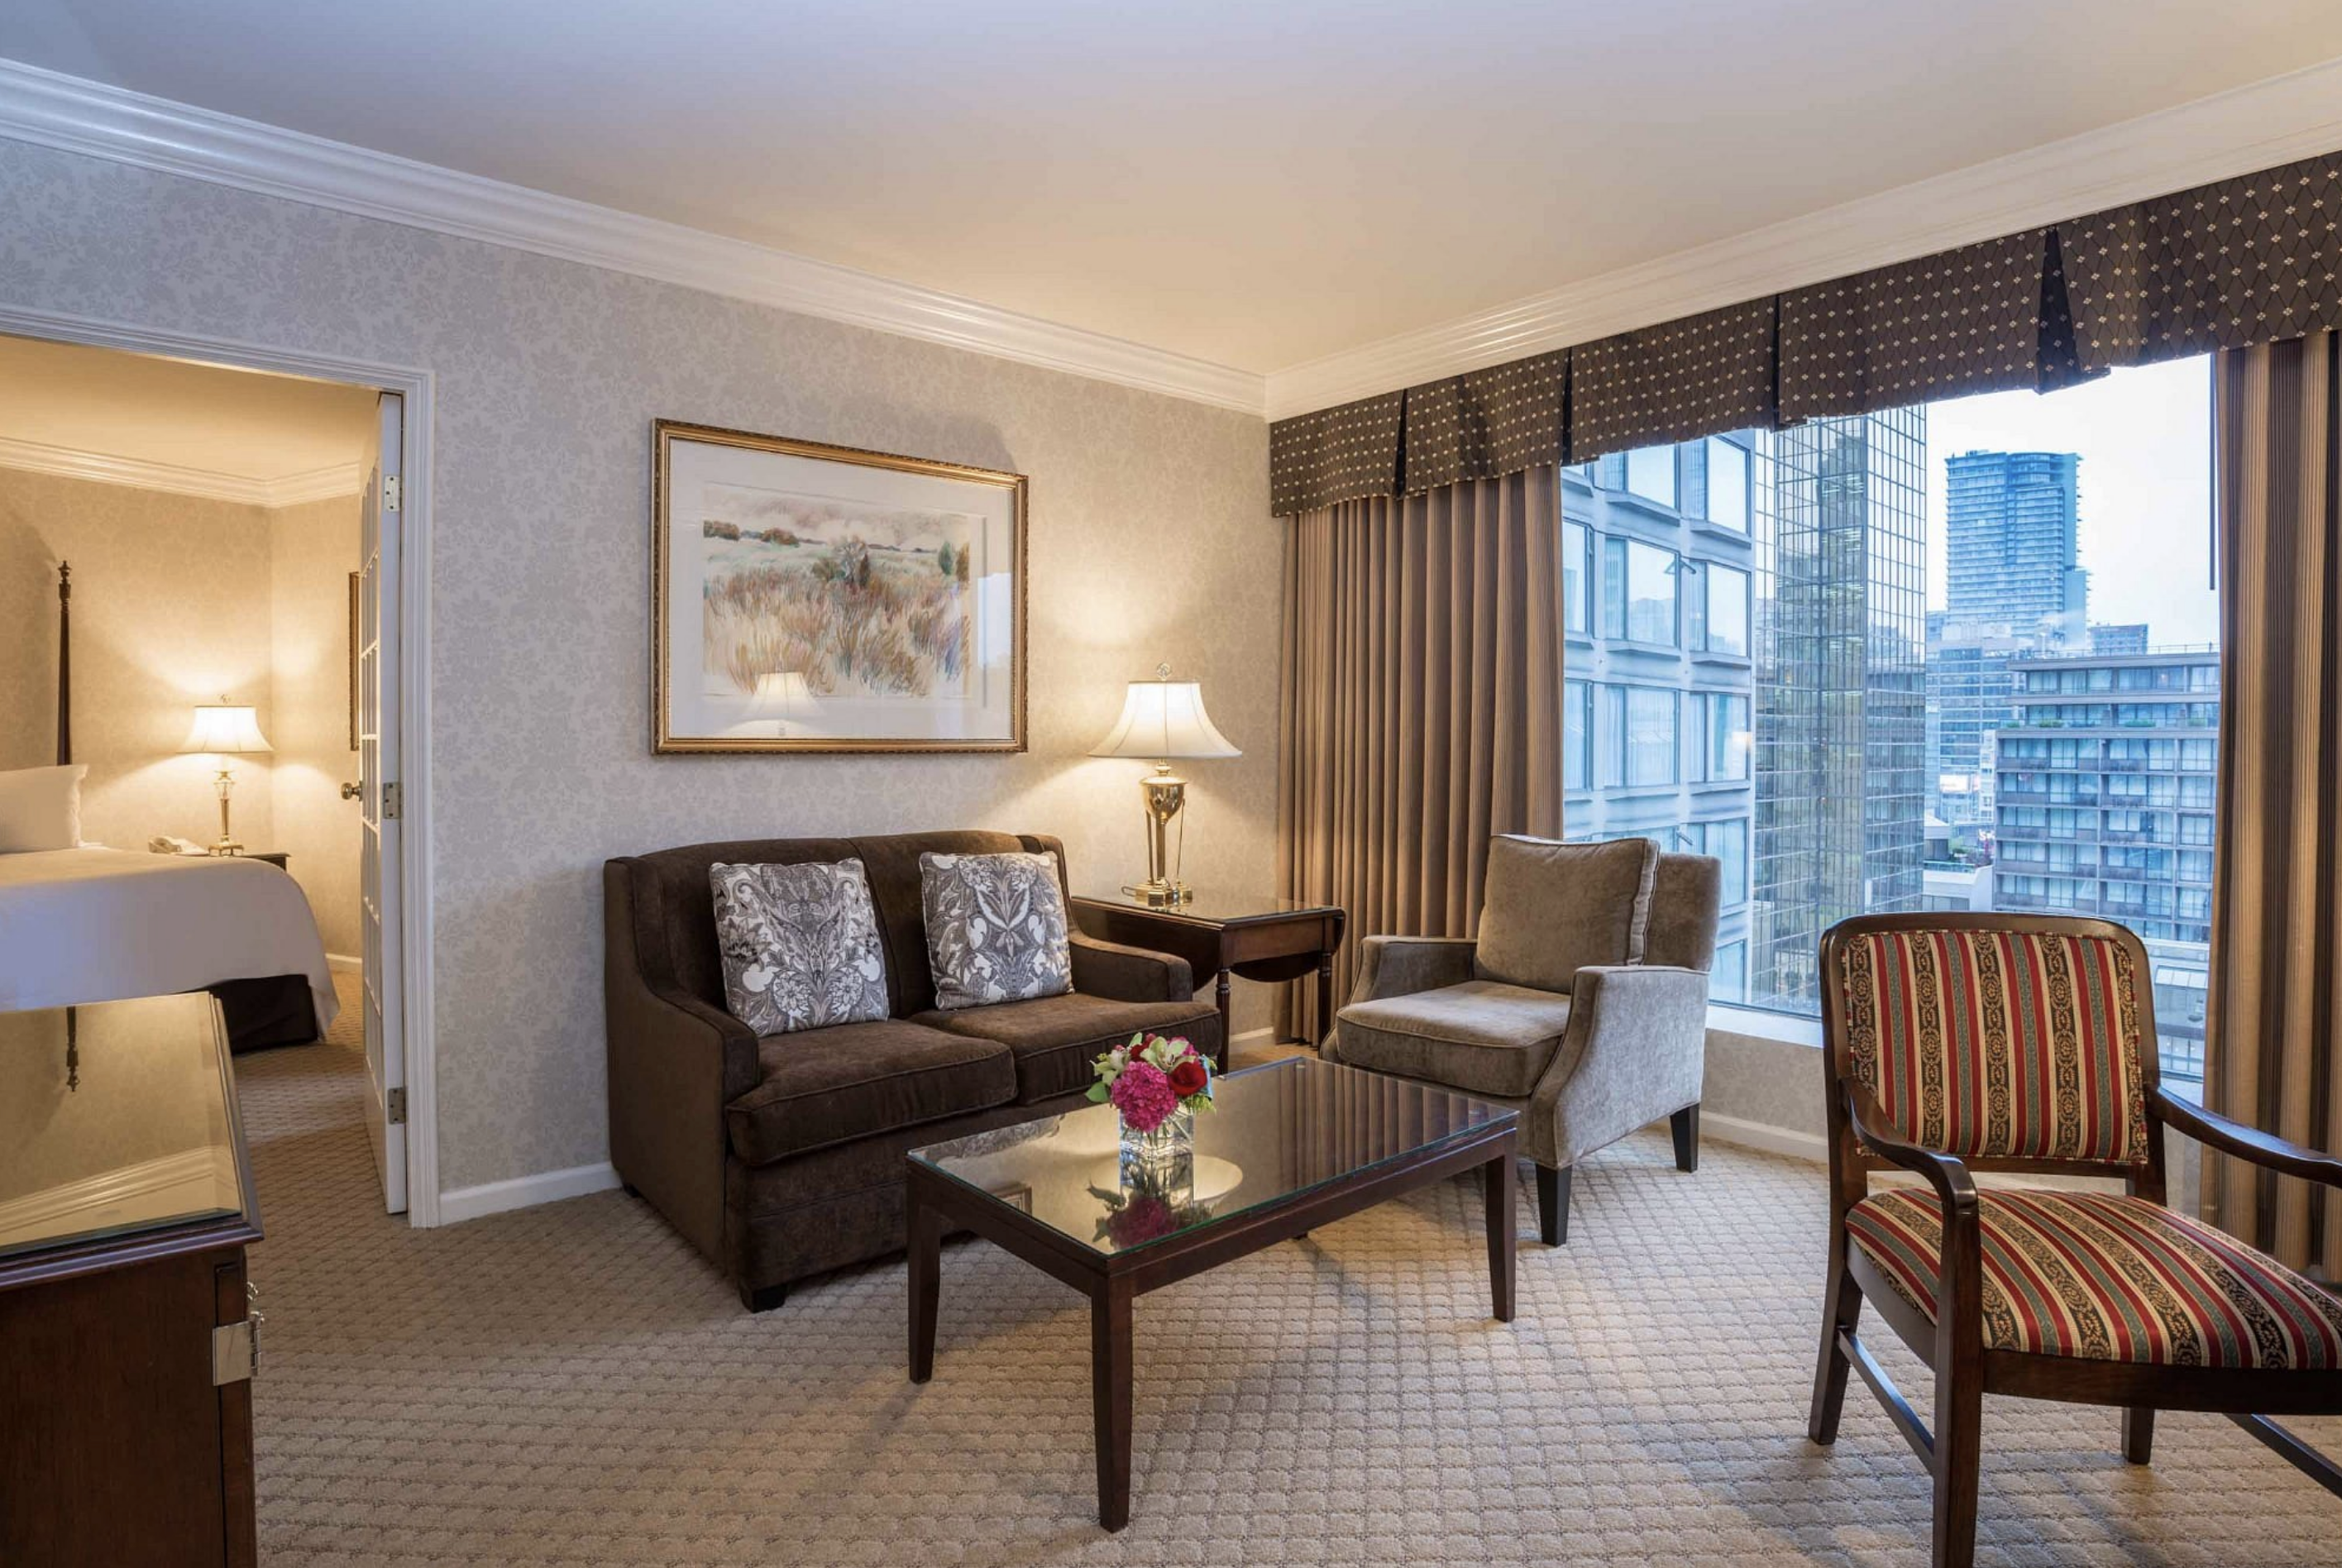 9. The Sutton Place Hotel Vancouver 2